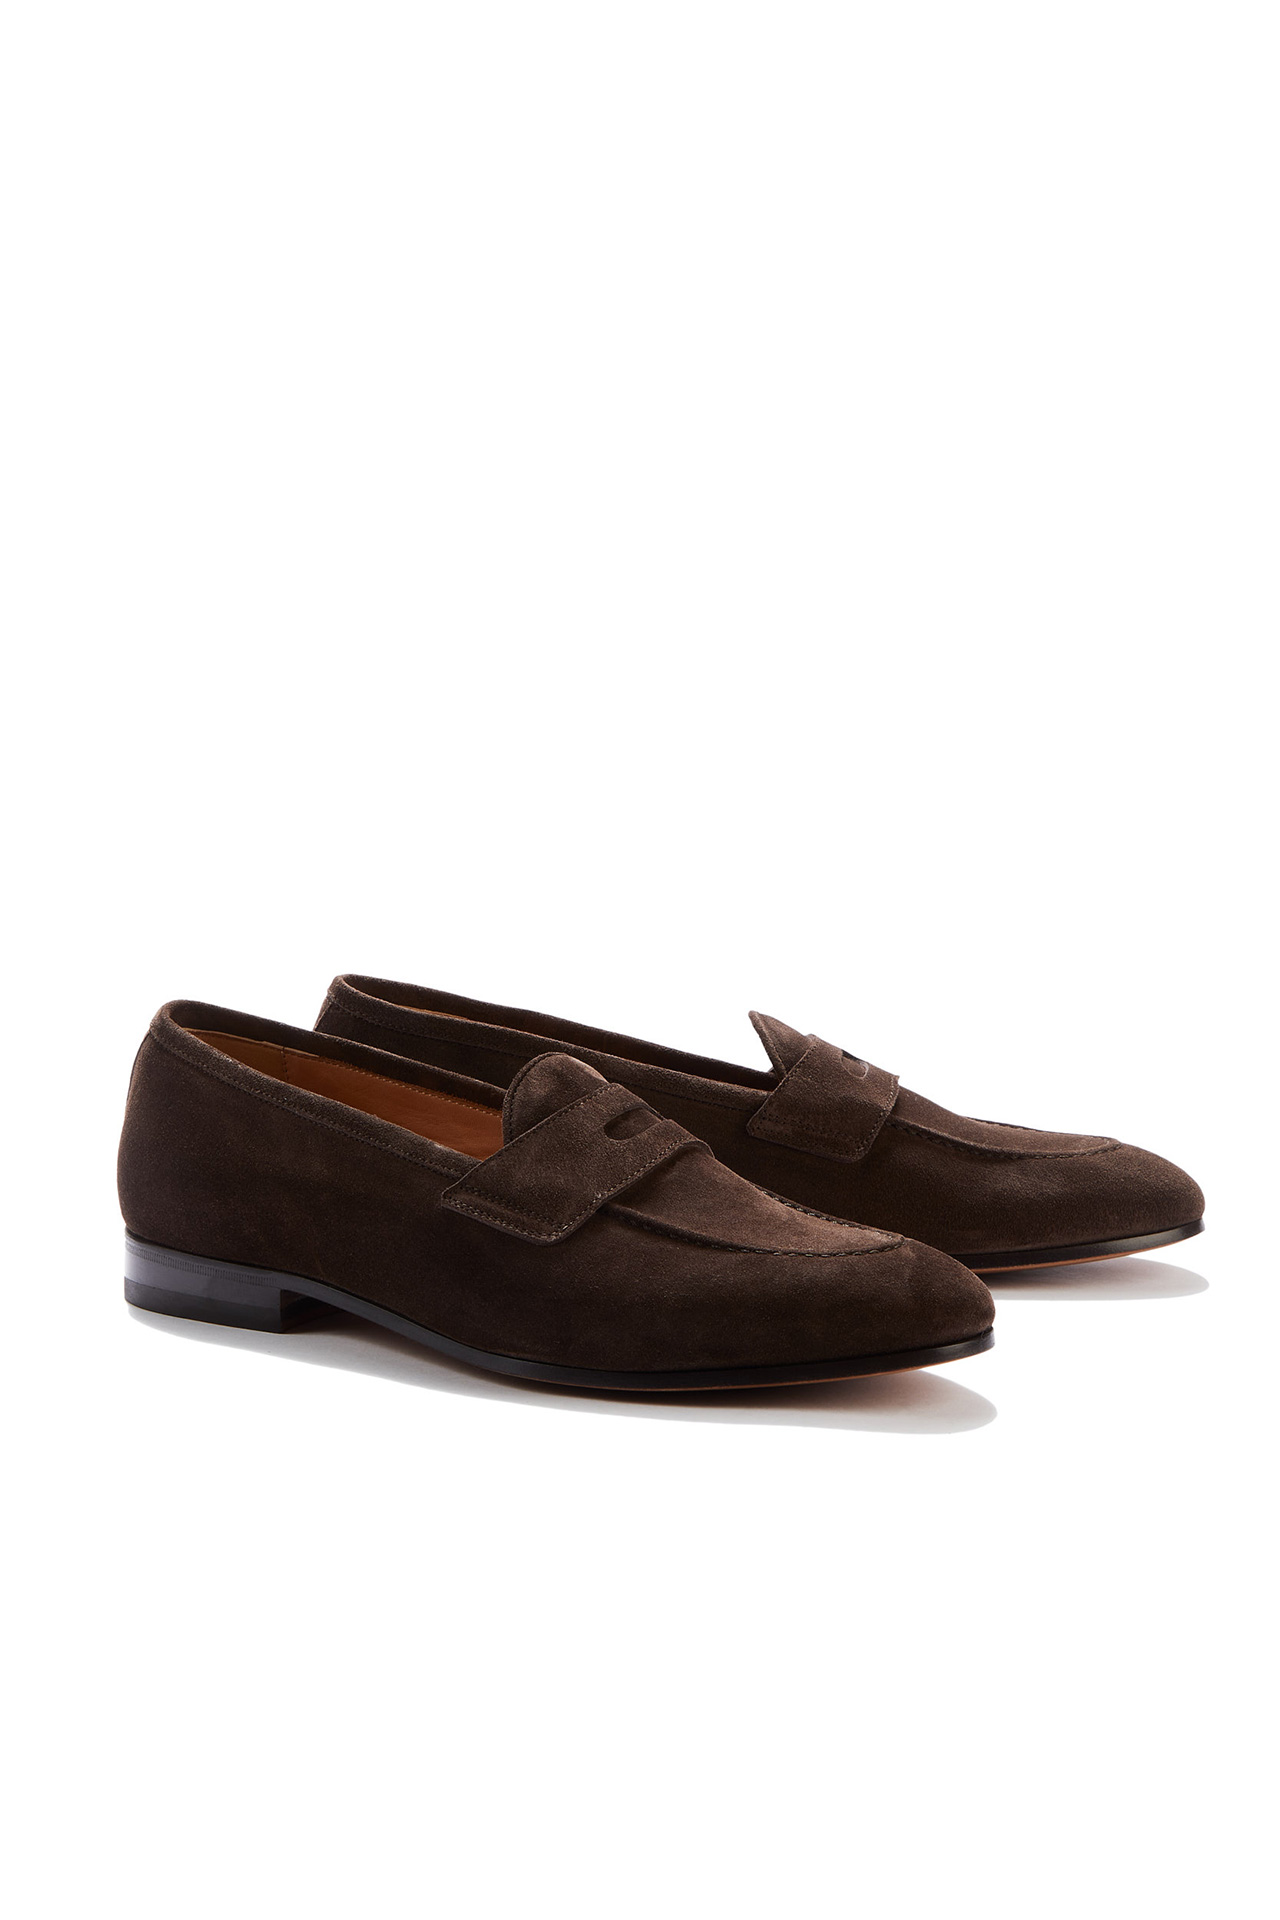 Lawrence Dark Brown Suede Penny Loafers - Barbanera